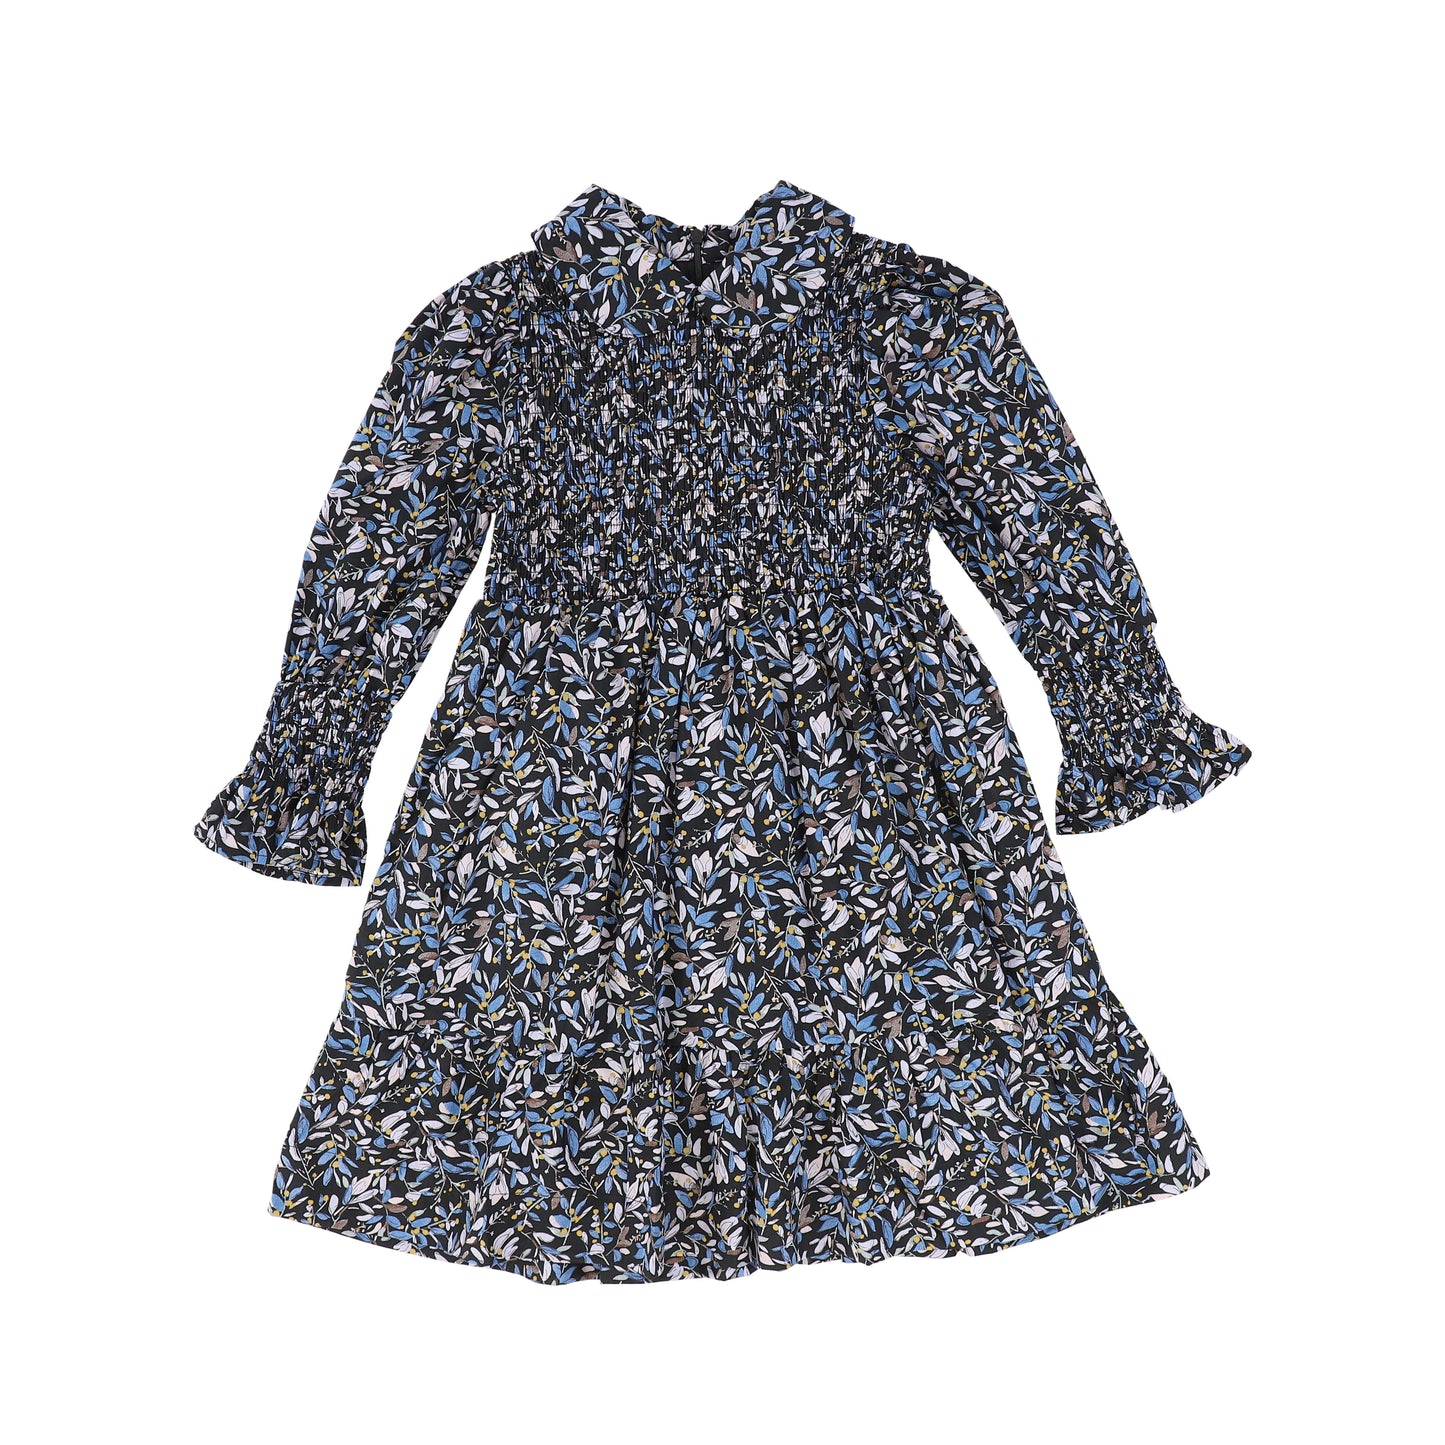 ONE CHILD NAVY FLORAL SMOCKED COLLAR DRESS